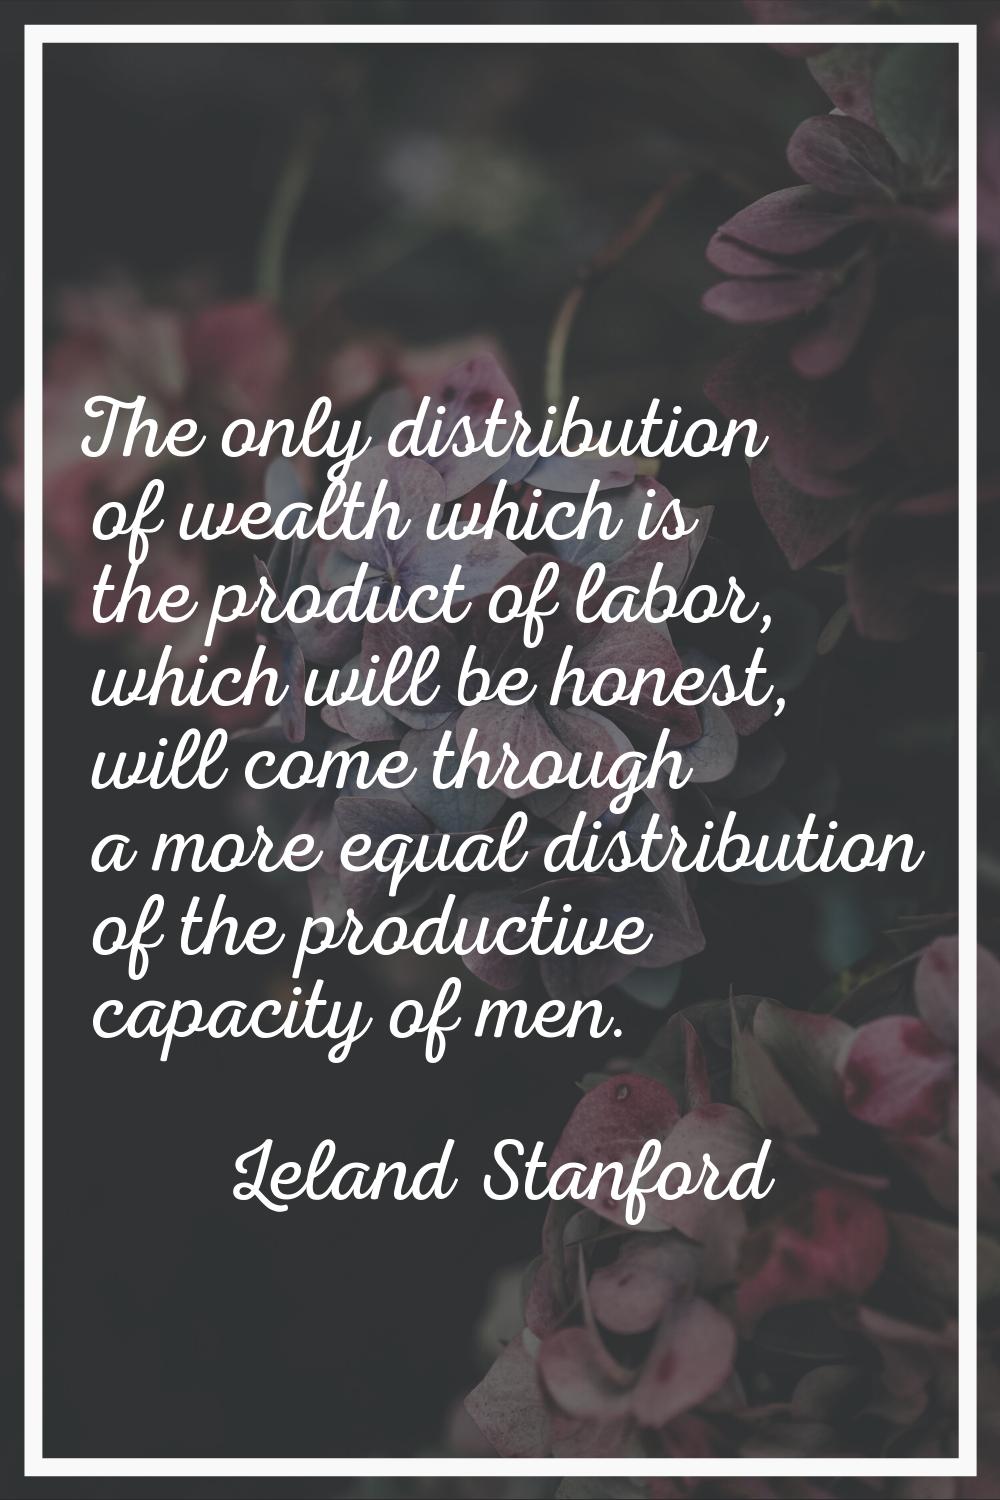 The only distribution of wealth which is the product of labor, which will be honest, will come thro